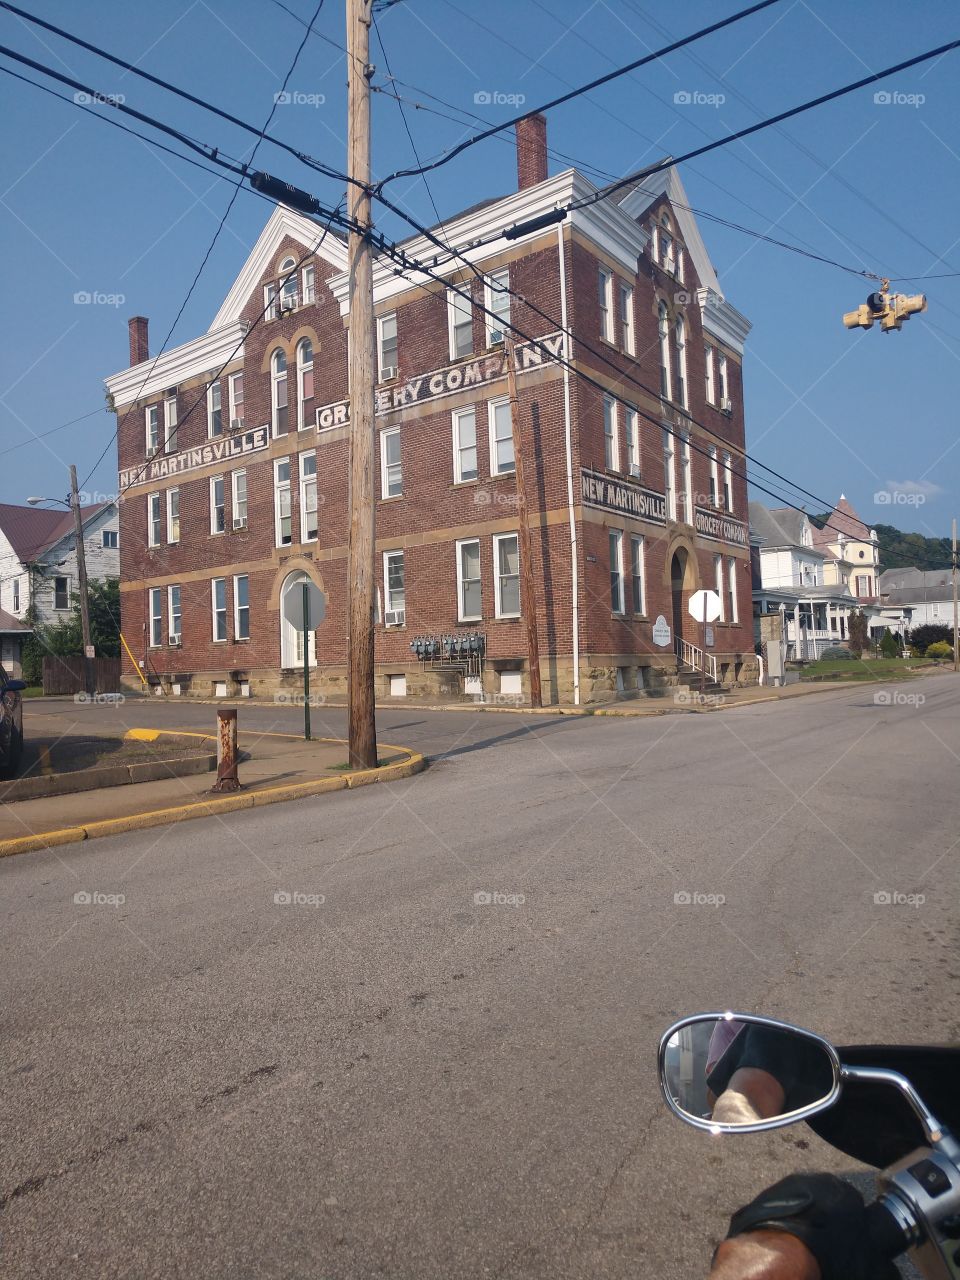 traveling through Martinsville, viewing historical buildings.